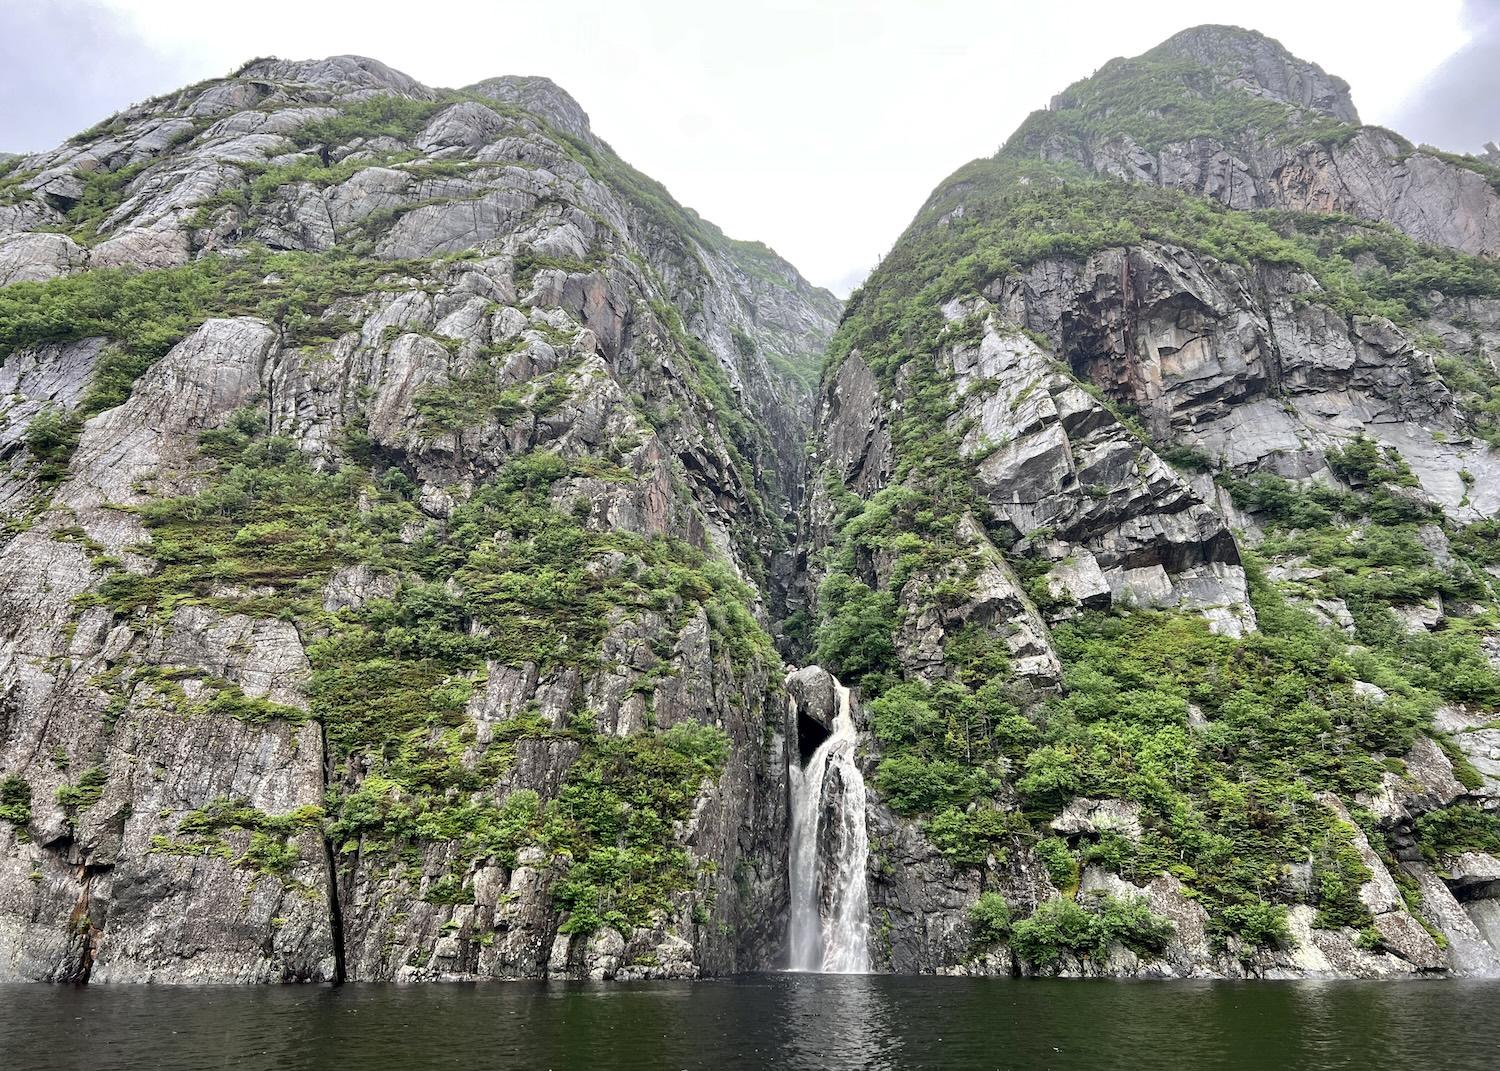 You'll see several waterfalls in the cliffs on either side of Western Brook Pond.